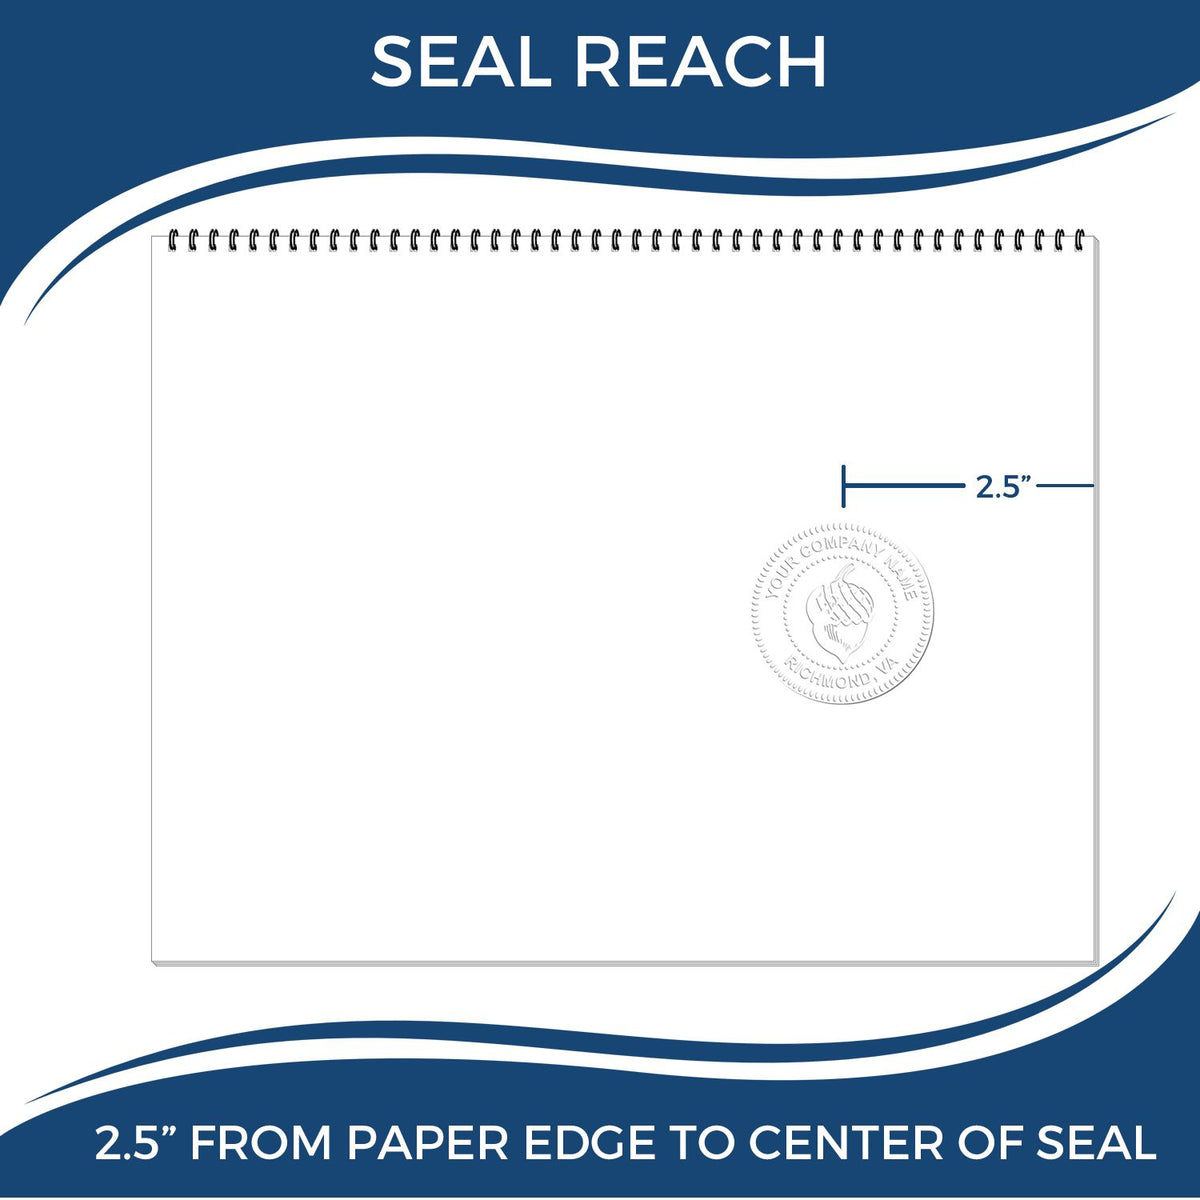 An infographic showing the seal reach which is represented by a ruler and a miniature seal image of the State of Texas Long Reach Architectural Embossing Seal